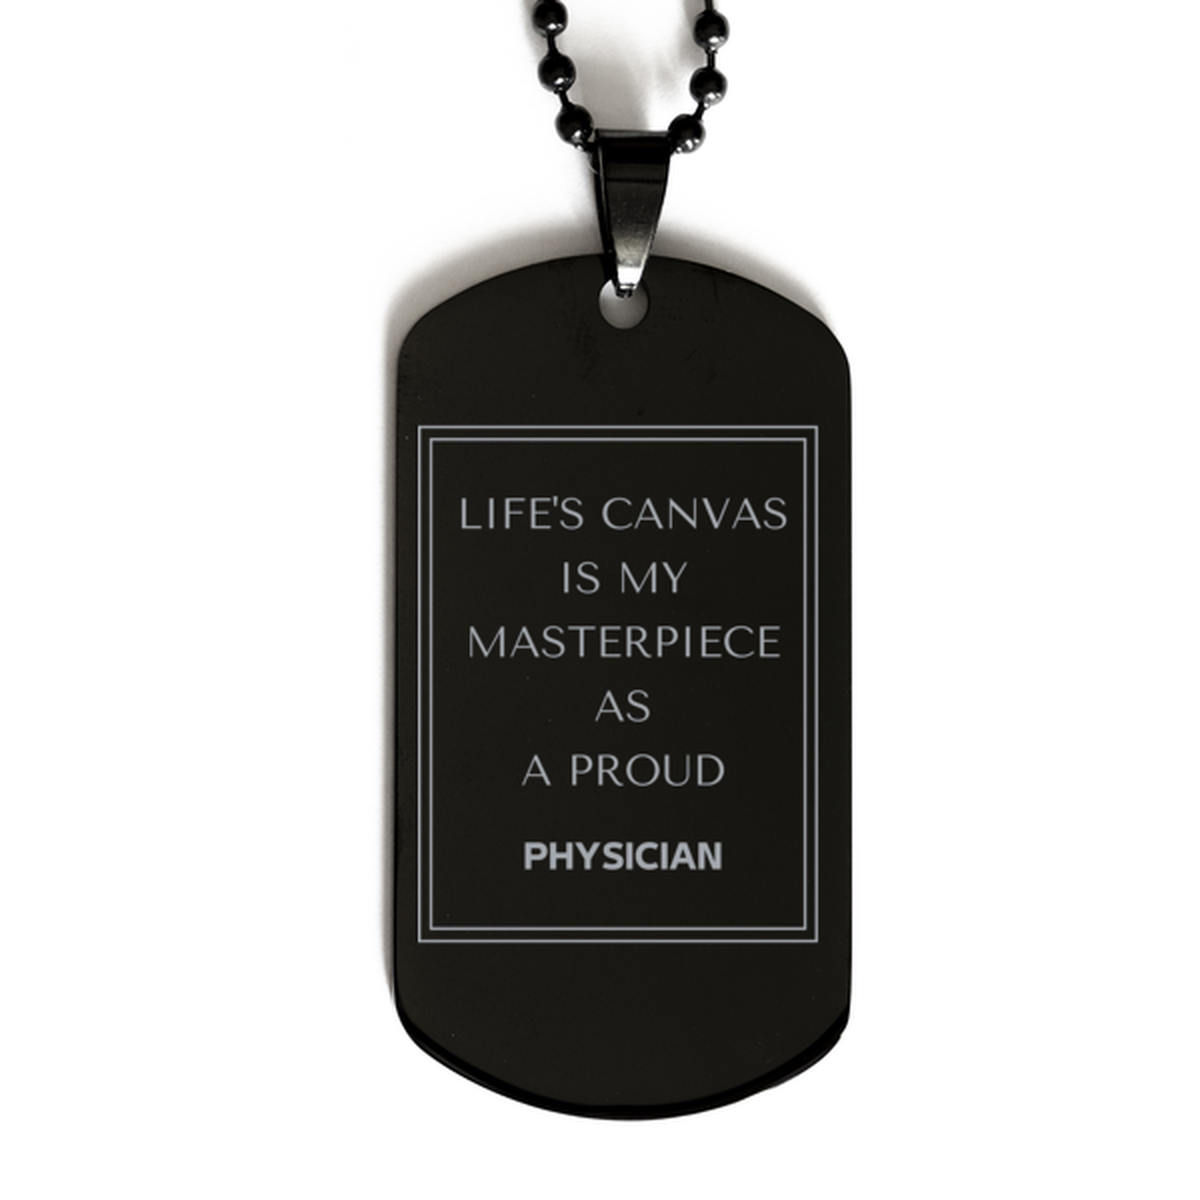 Proud Physician Gifts, Life's canvas is my masterpiece, Epic Birthday Christmas Unique Black Dog Tag For Physician, Coworkers, Men, Women, Friends